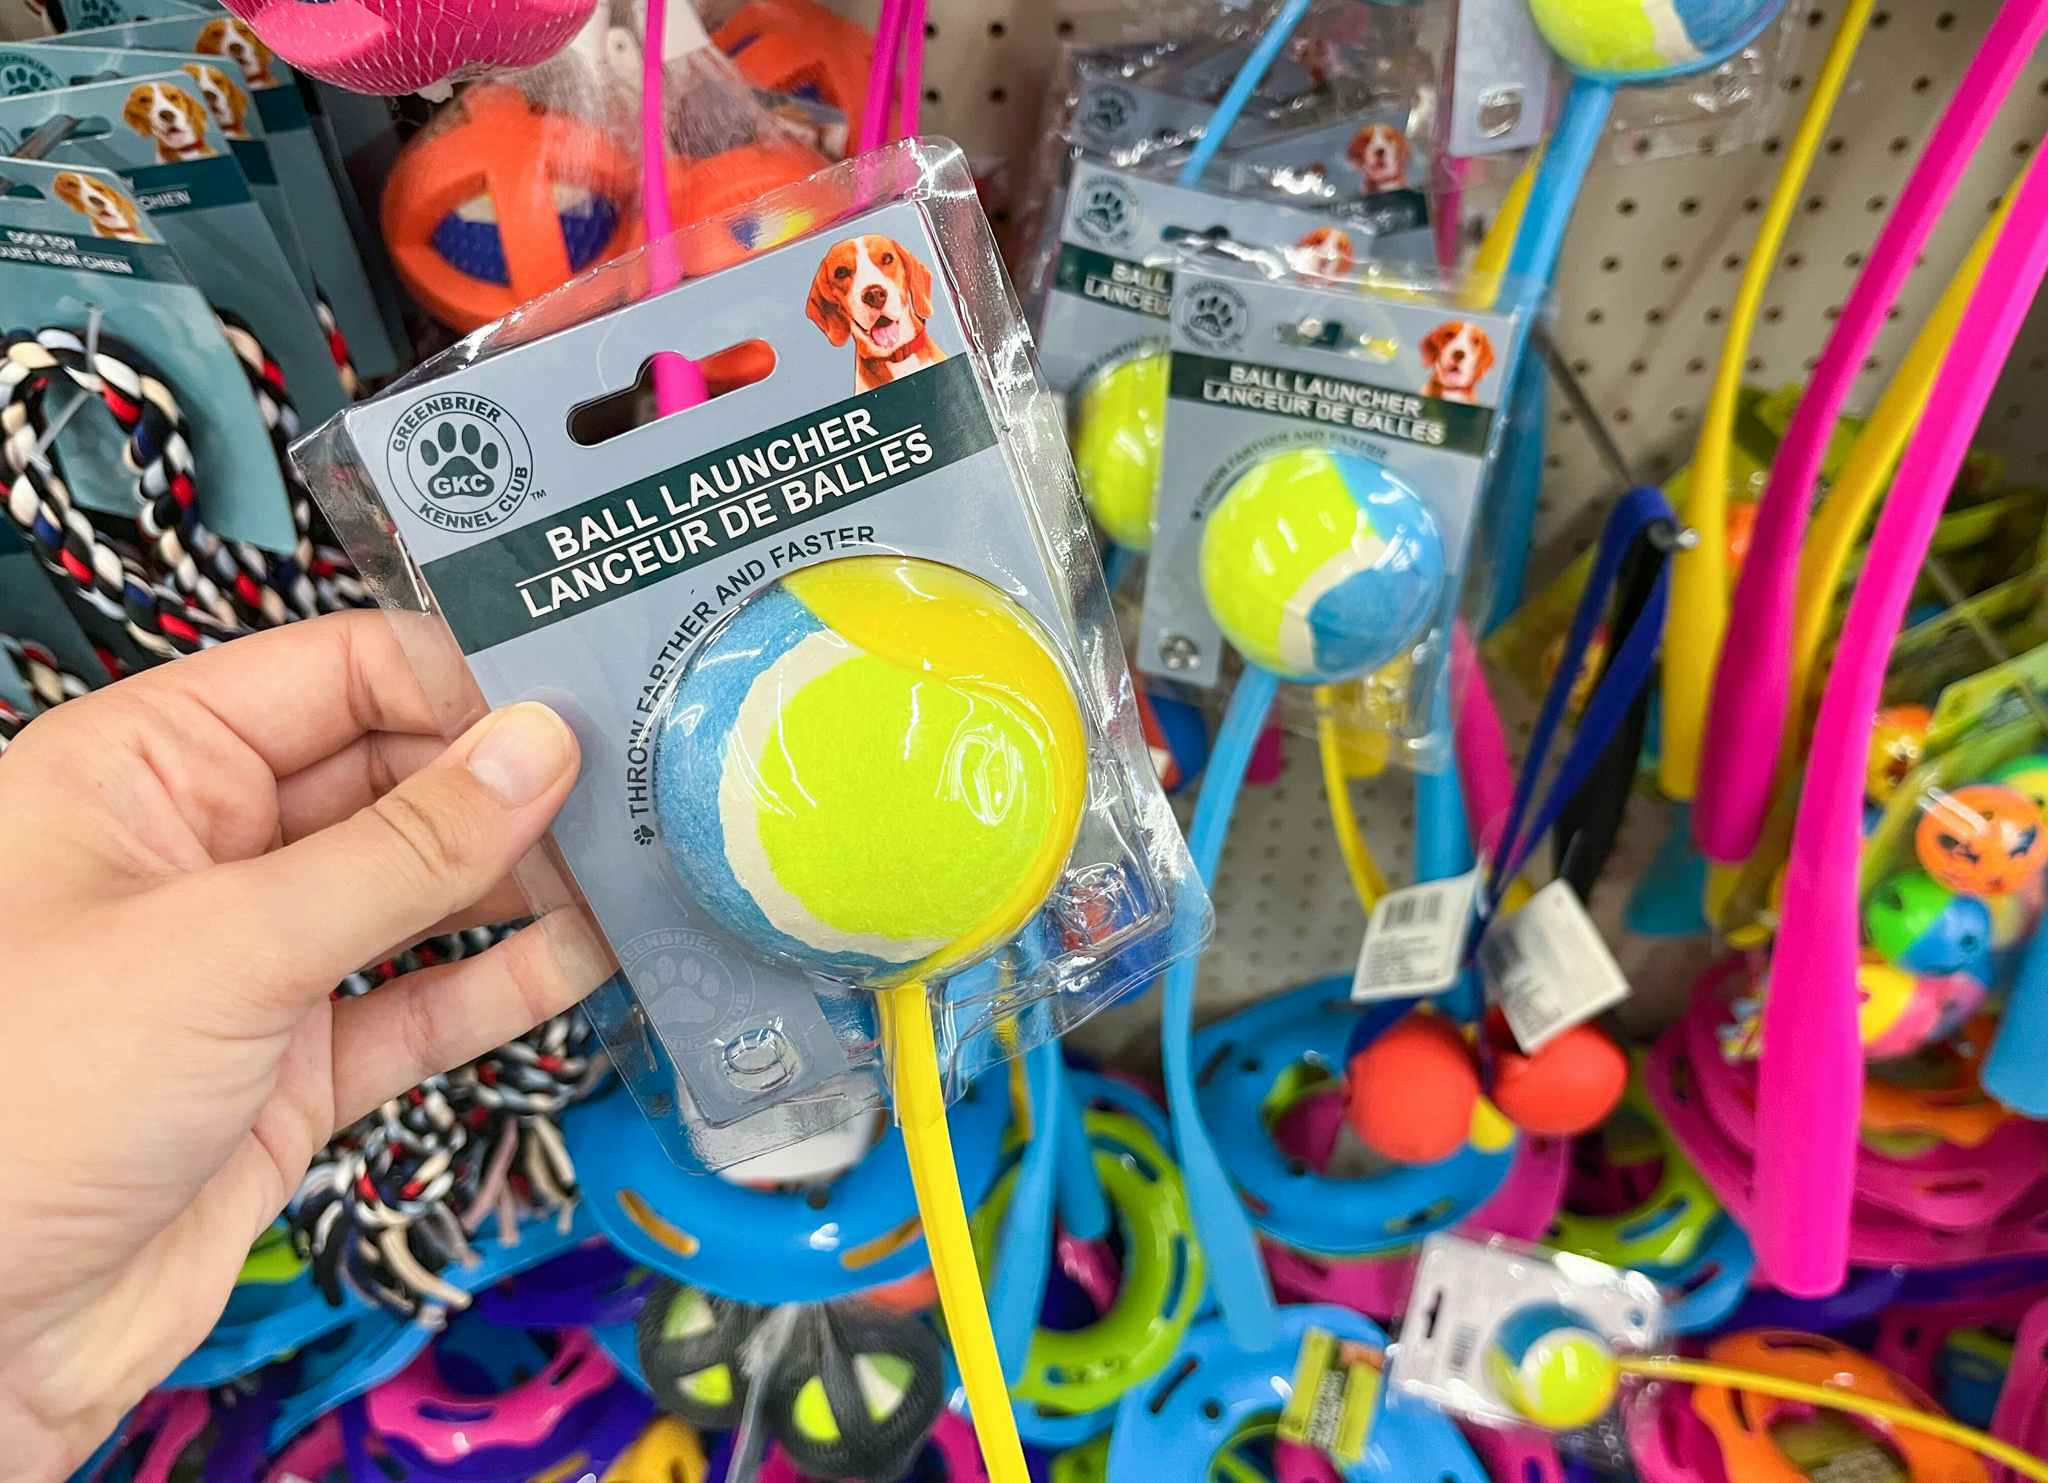 Greenbrier Kennel Club Ball Launcher With Ball dog toy at Dollar Tree